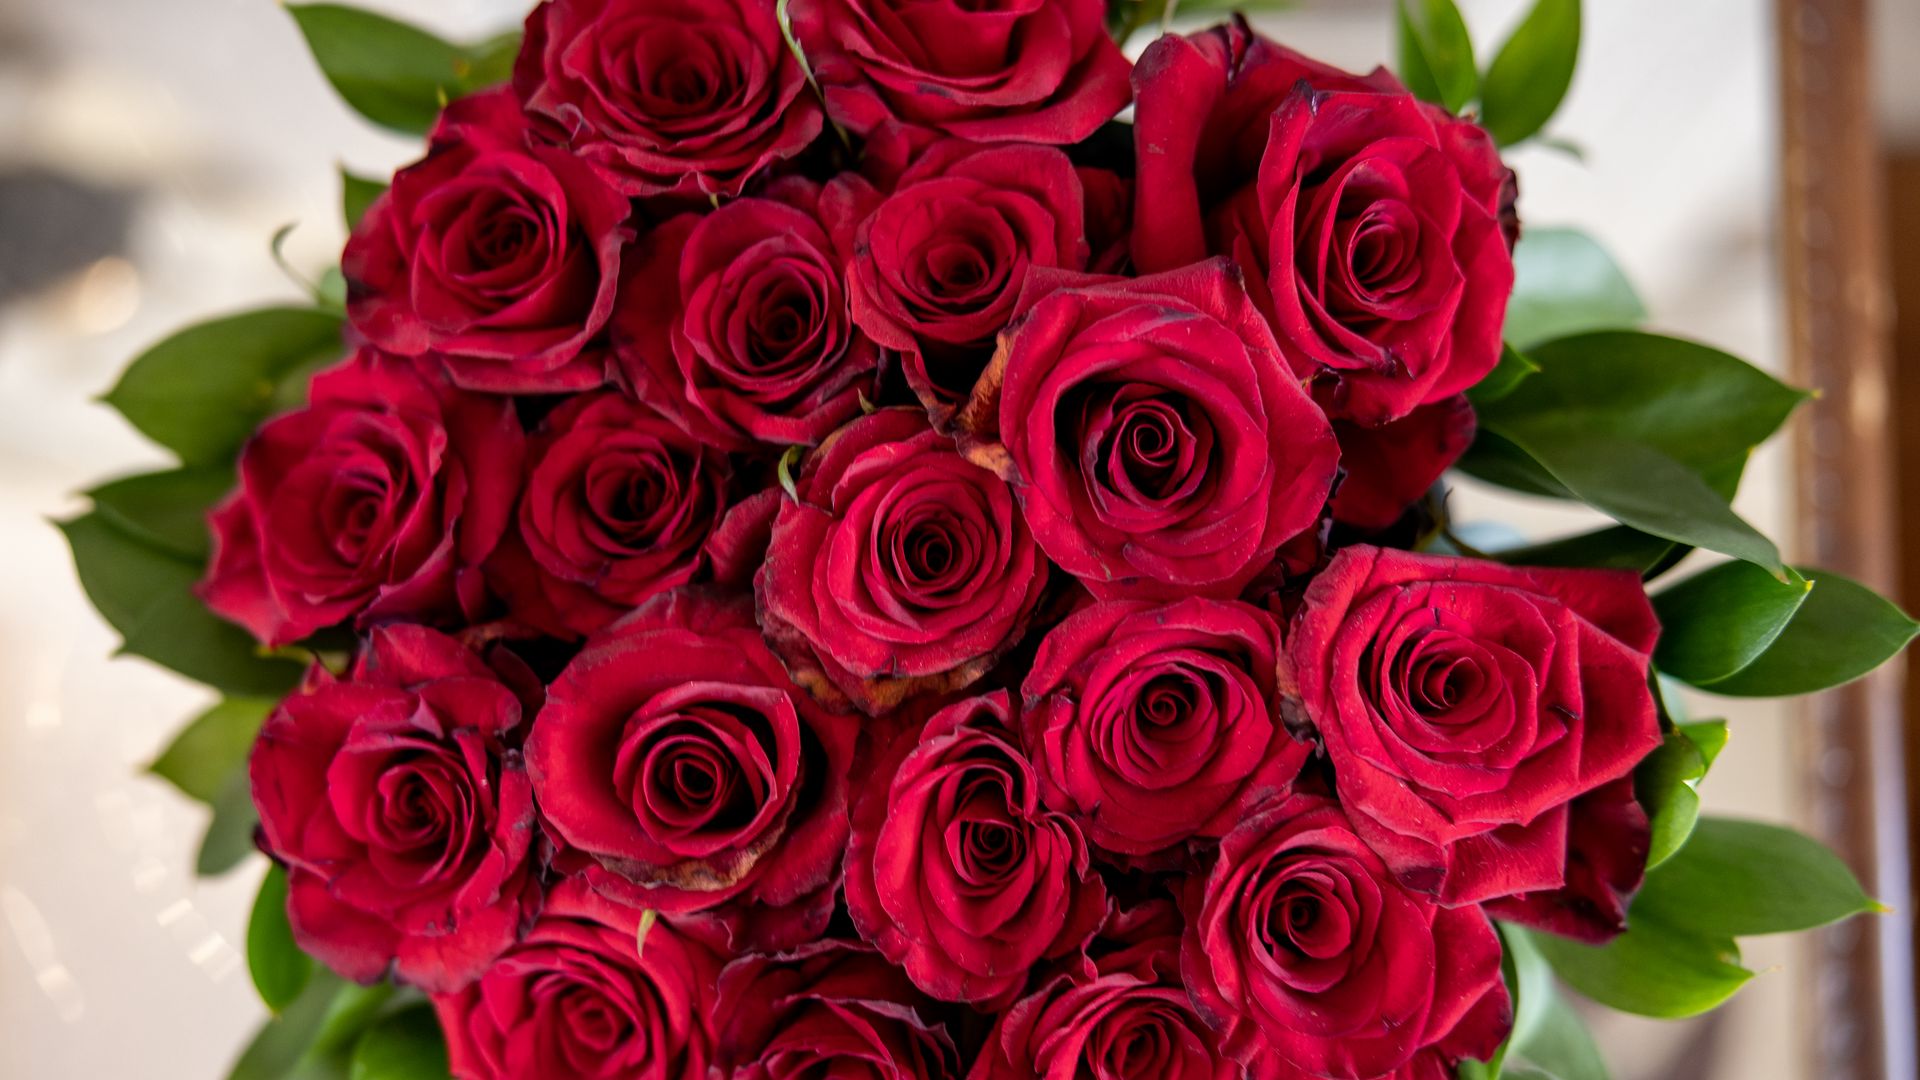 Download wallpaper 1920x1080 roses, flowers, bouquet, buds, red full hd ...